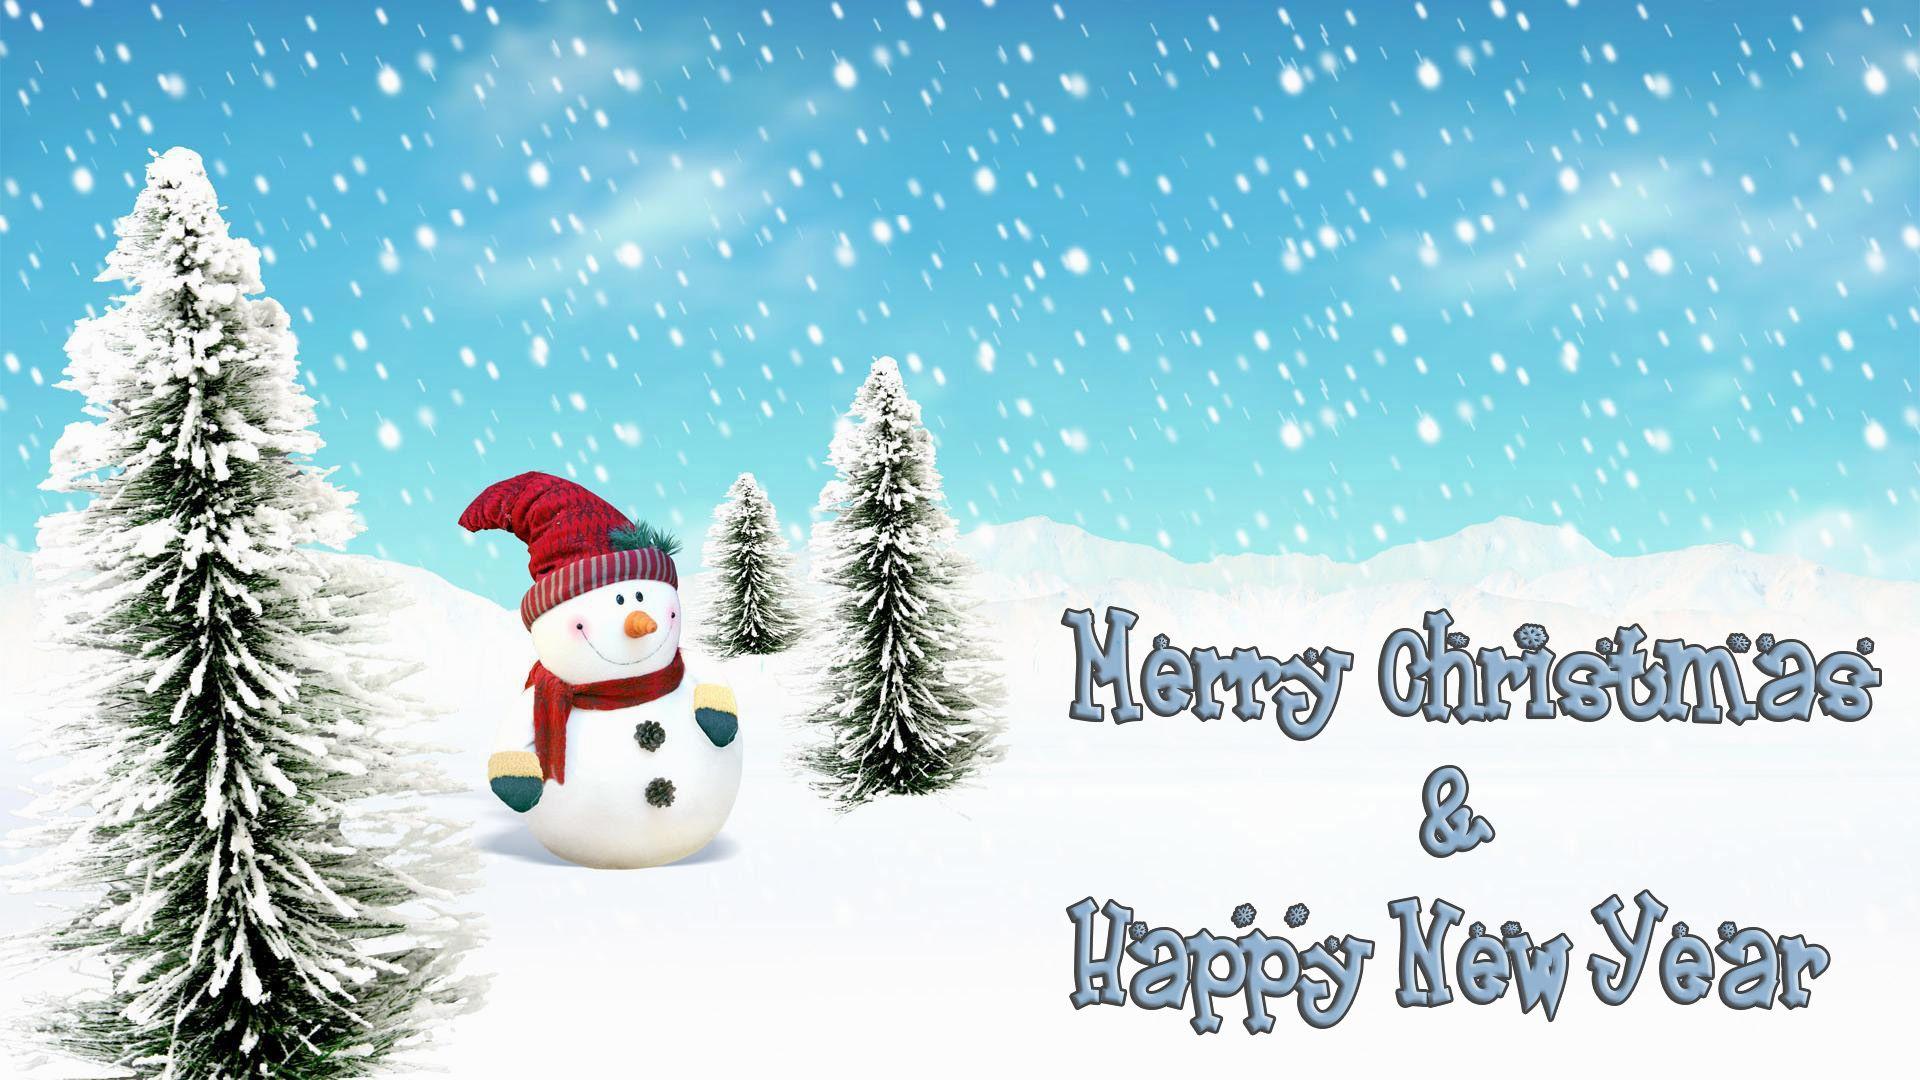 Best Merry Christmas 2018 and Happy New Year 2019 Image, Quotes